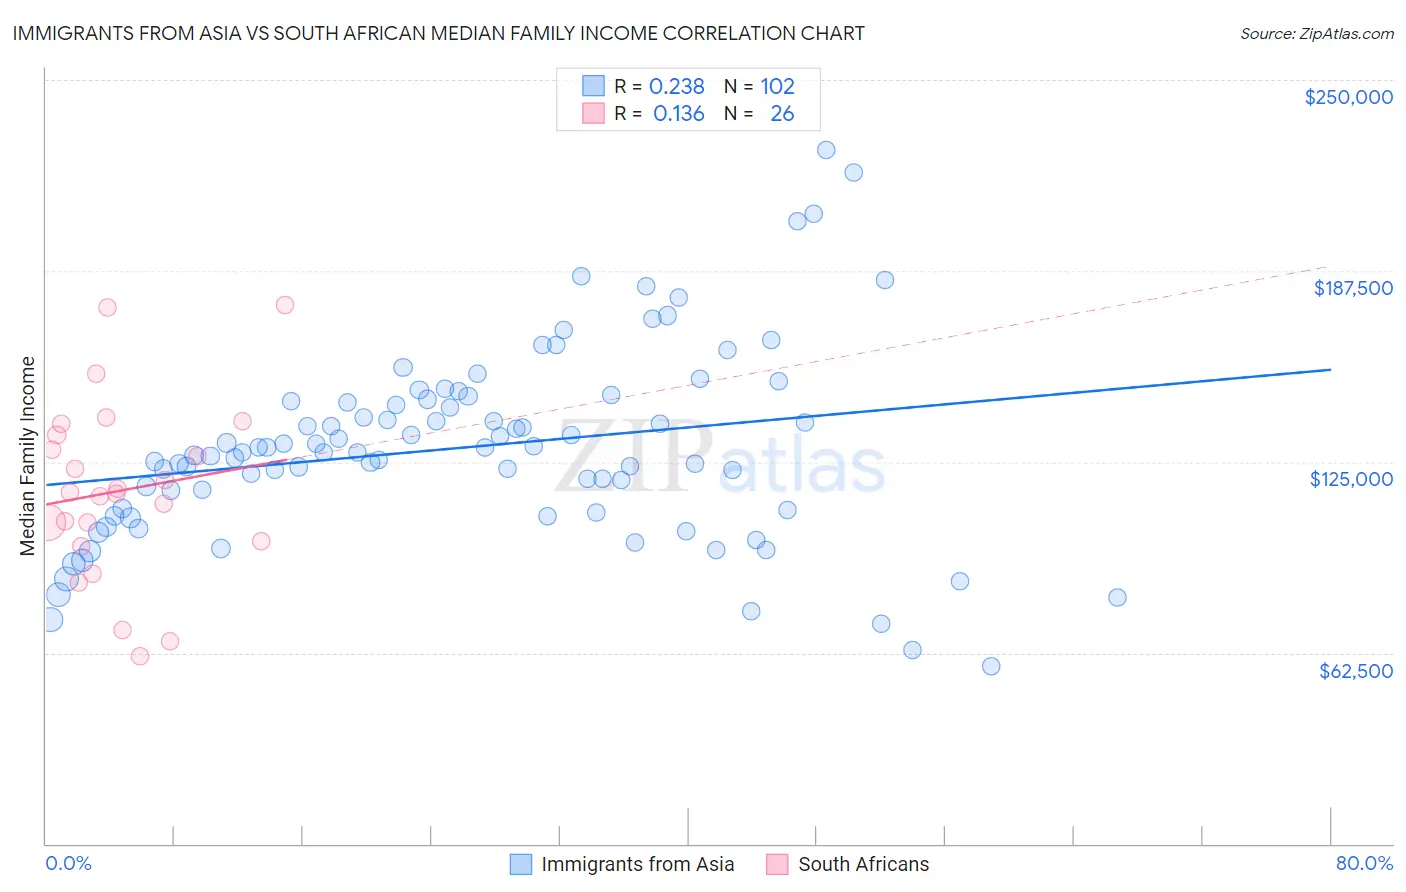 Immigrants from Asia vs South African Median Family Income